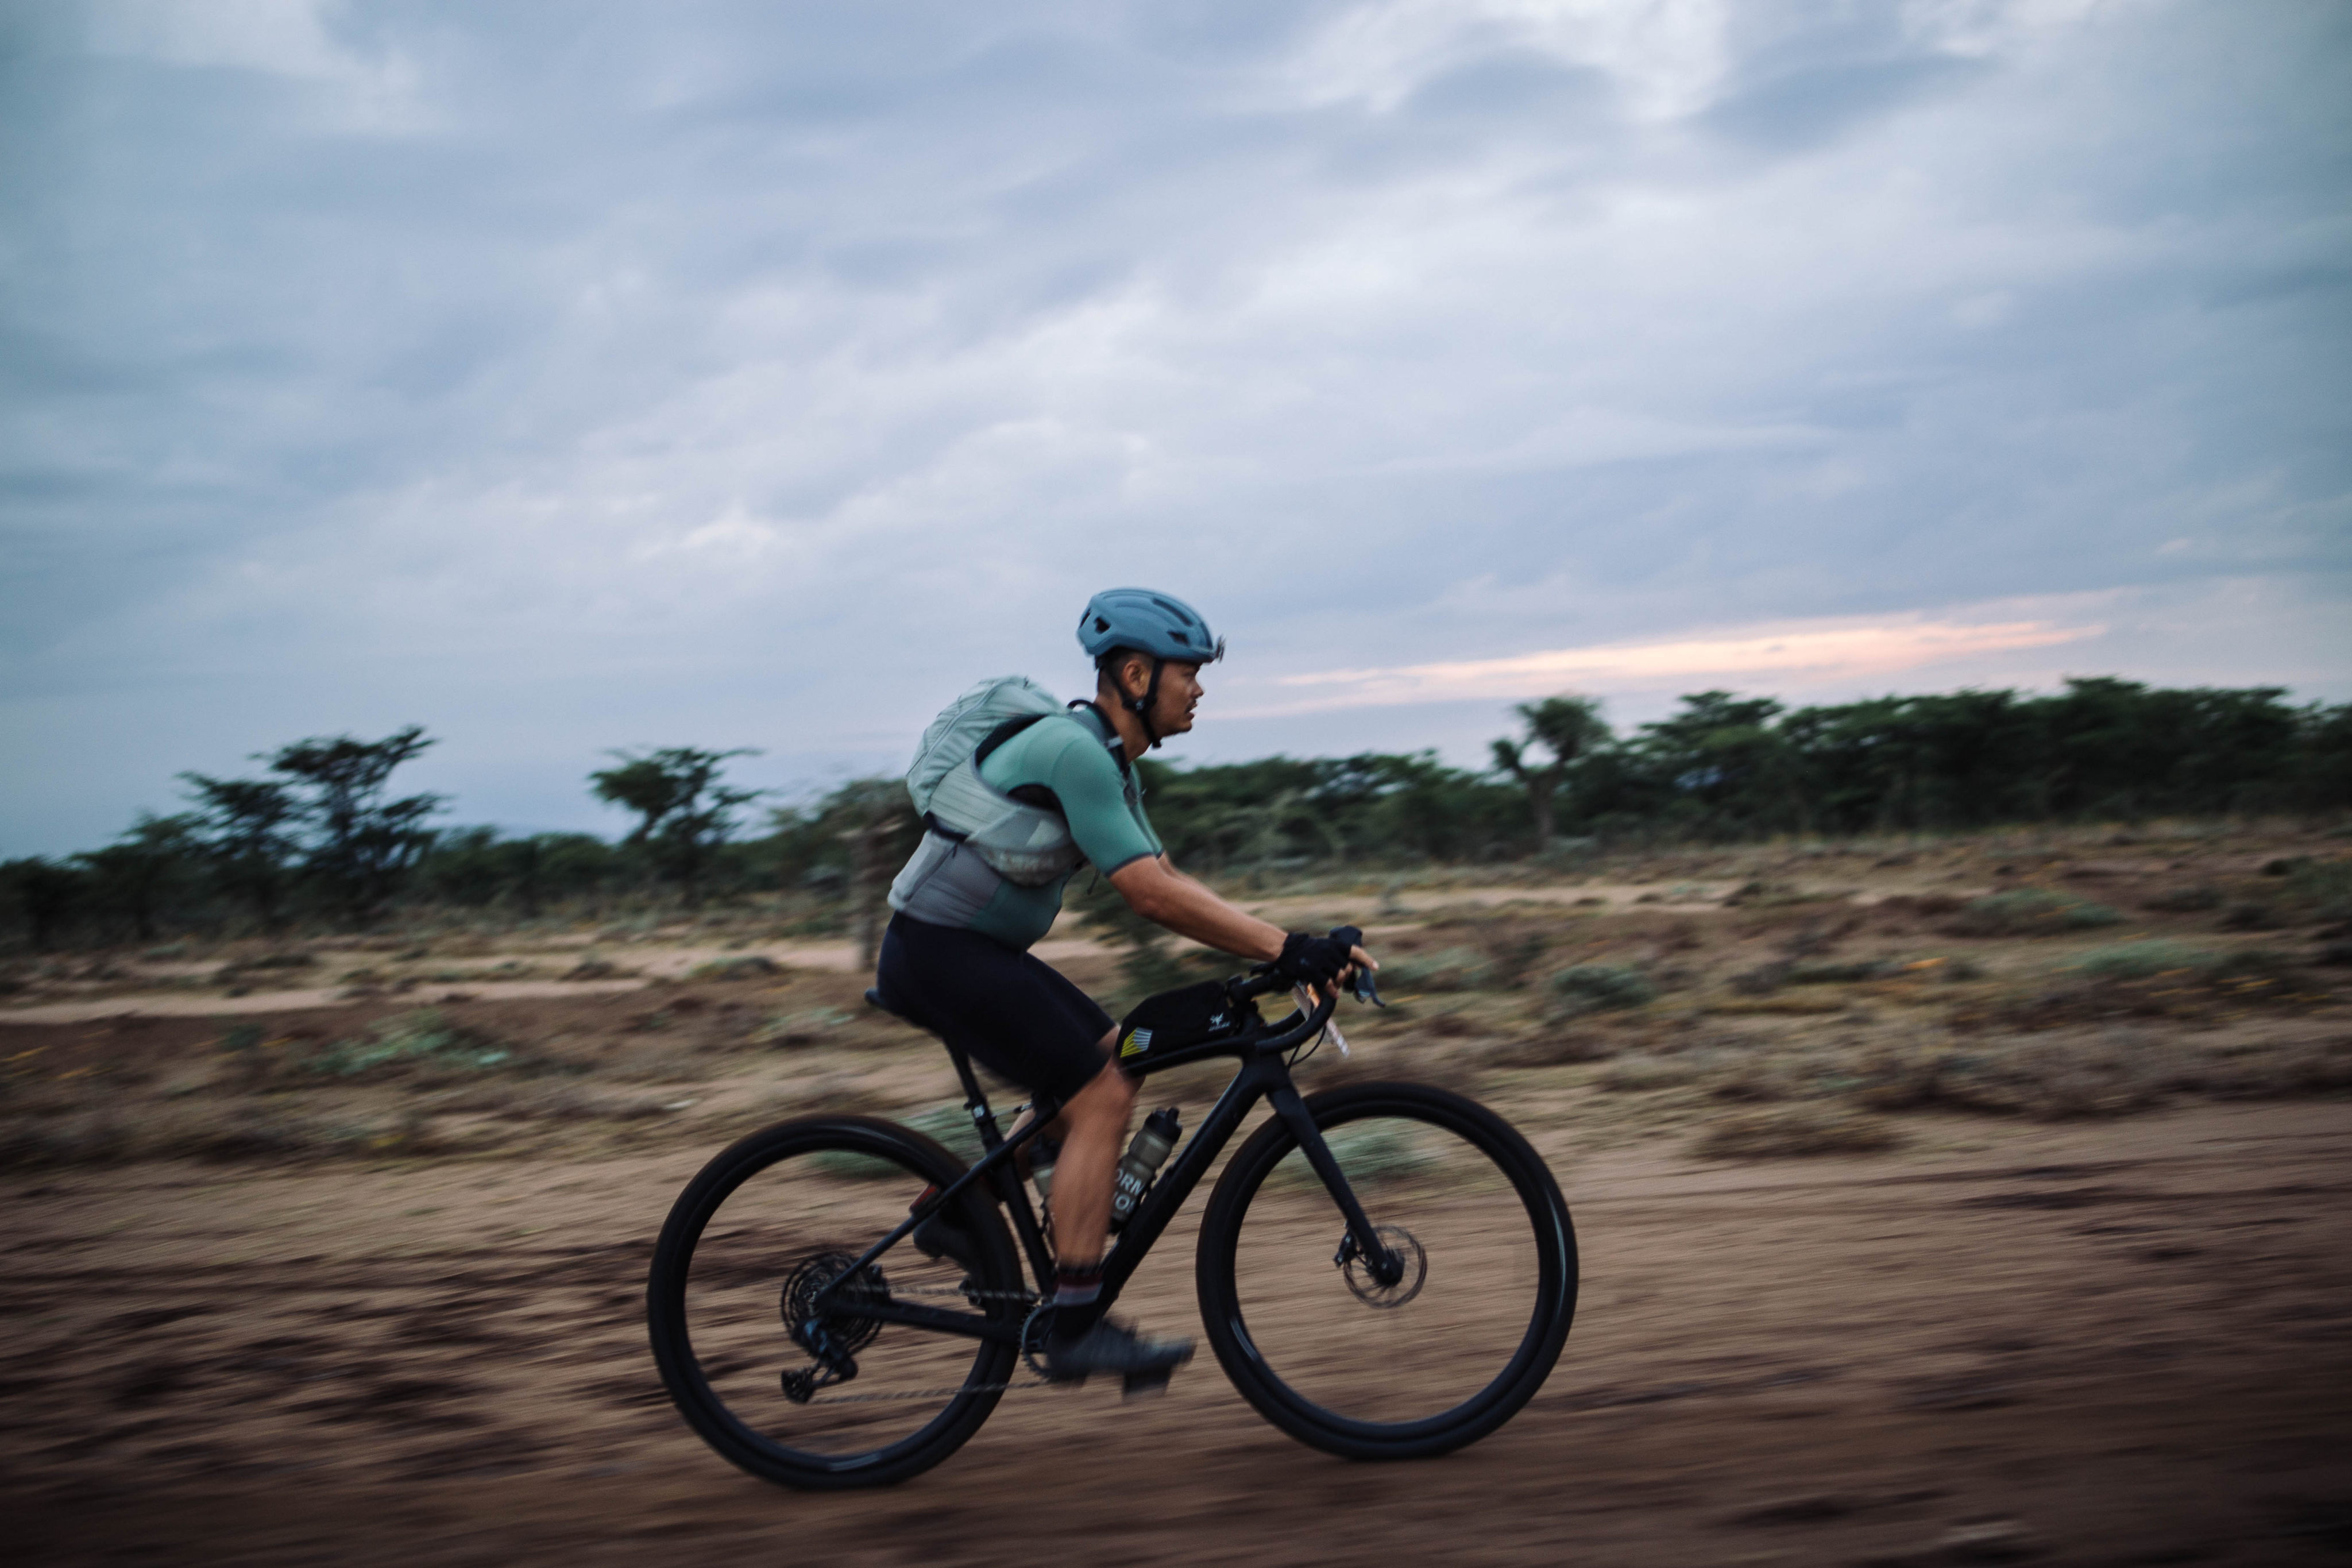 Cody Lin of Taiwan races across the savannah. It’s his first time in Africa, and he says he’s elated to be exploring Kenya through then the Migration Gravel Race. Photo: Kang-Chun Cheng